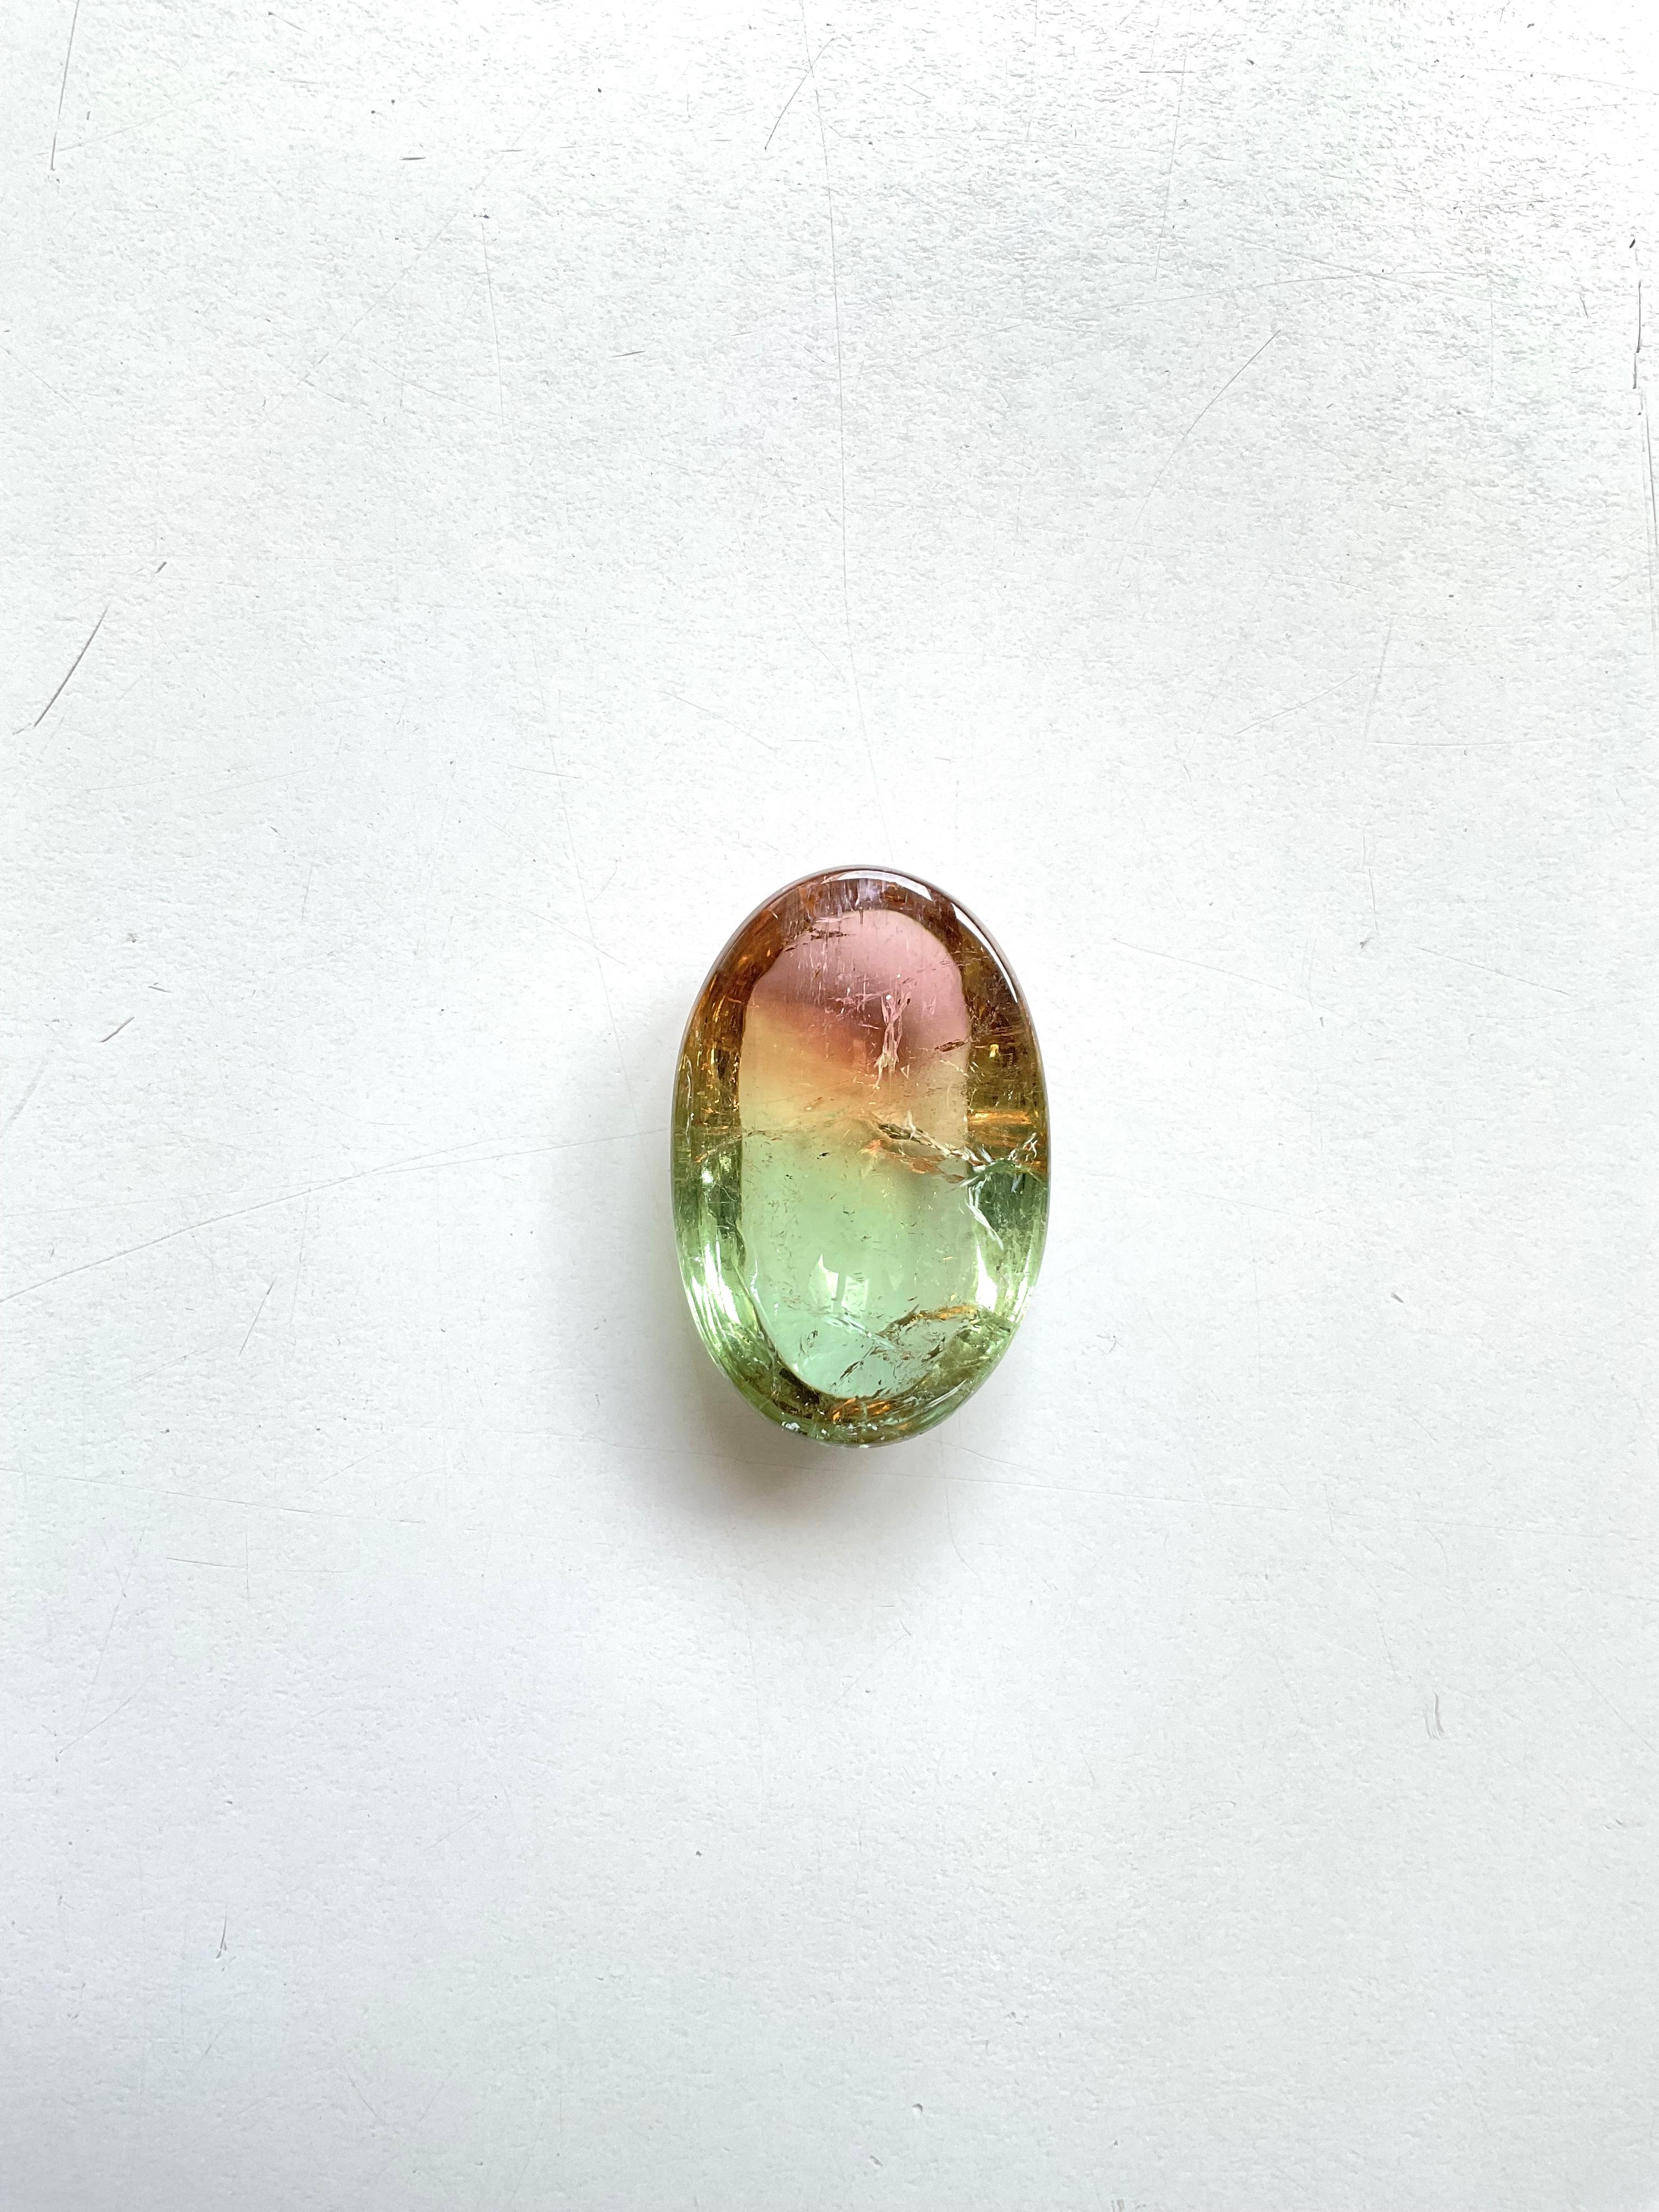 105.03 Carats Bi Color Tourmaline Oval cabochon very good quality color variety For Sale 2